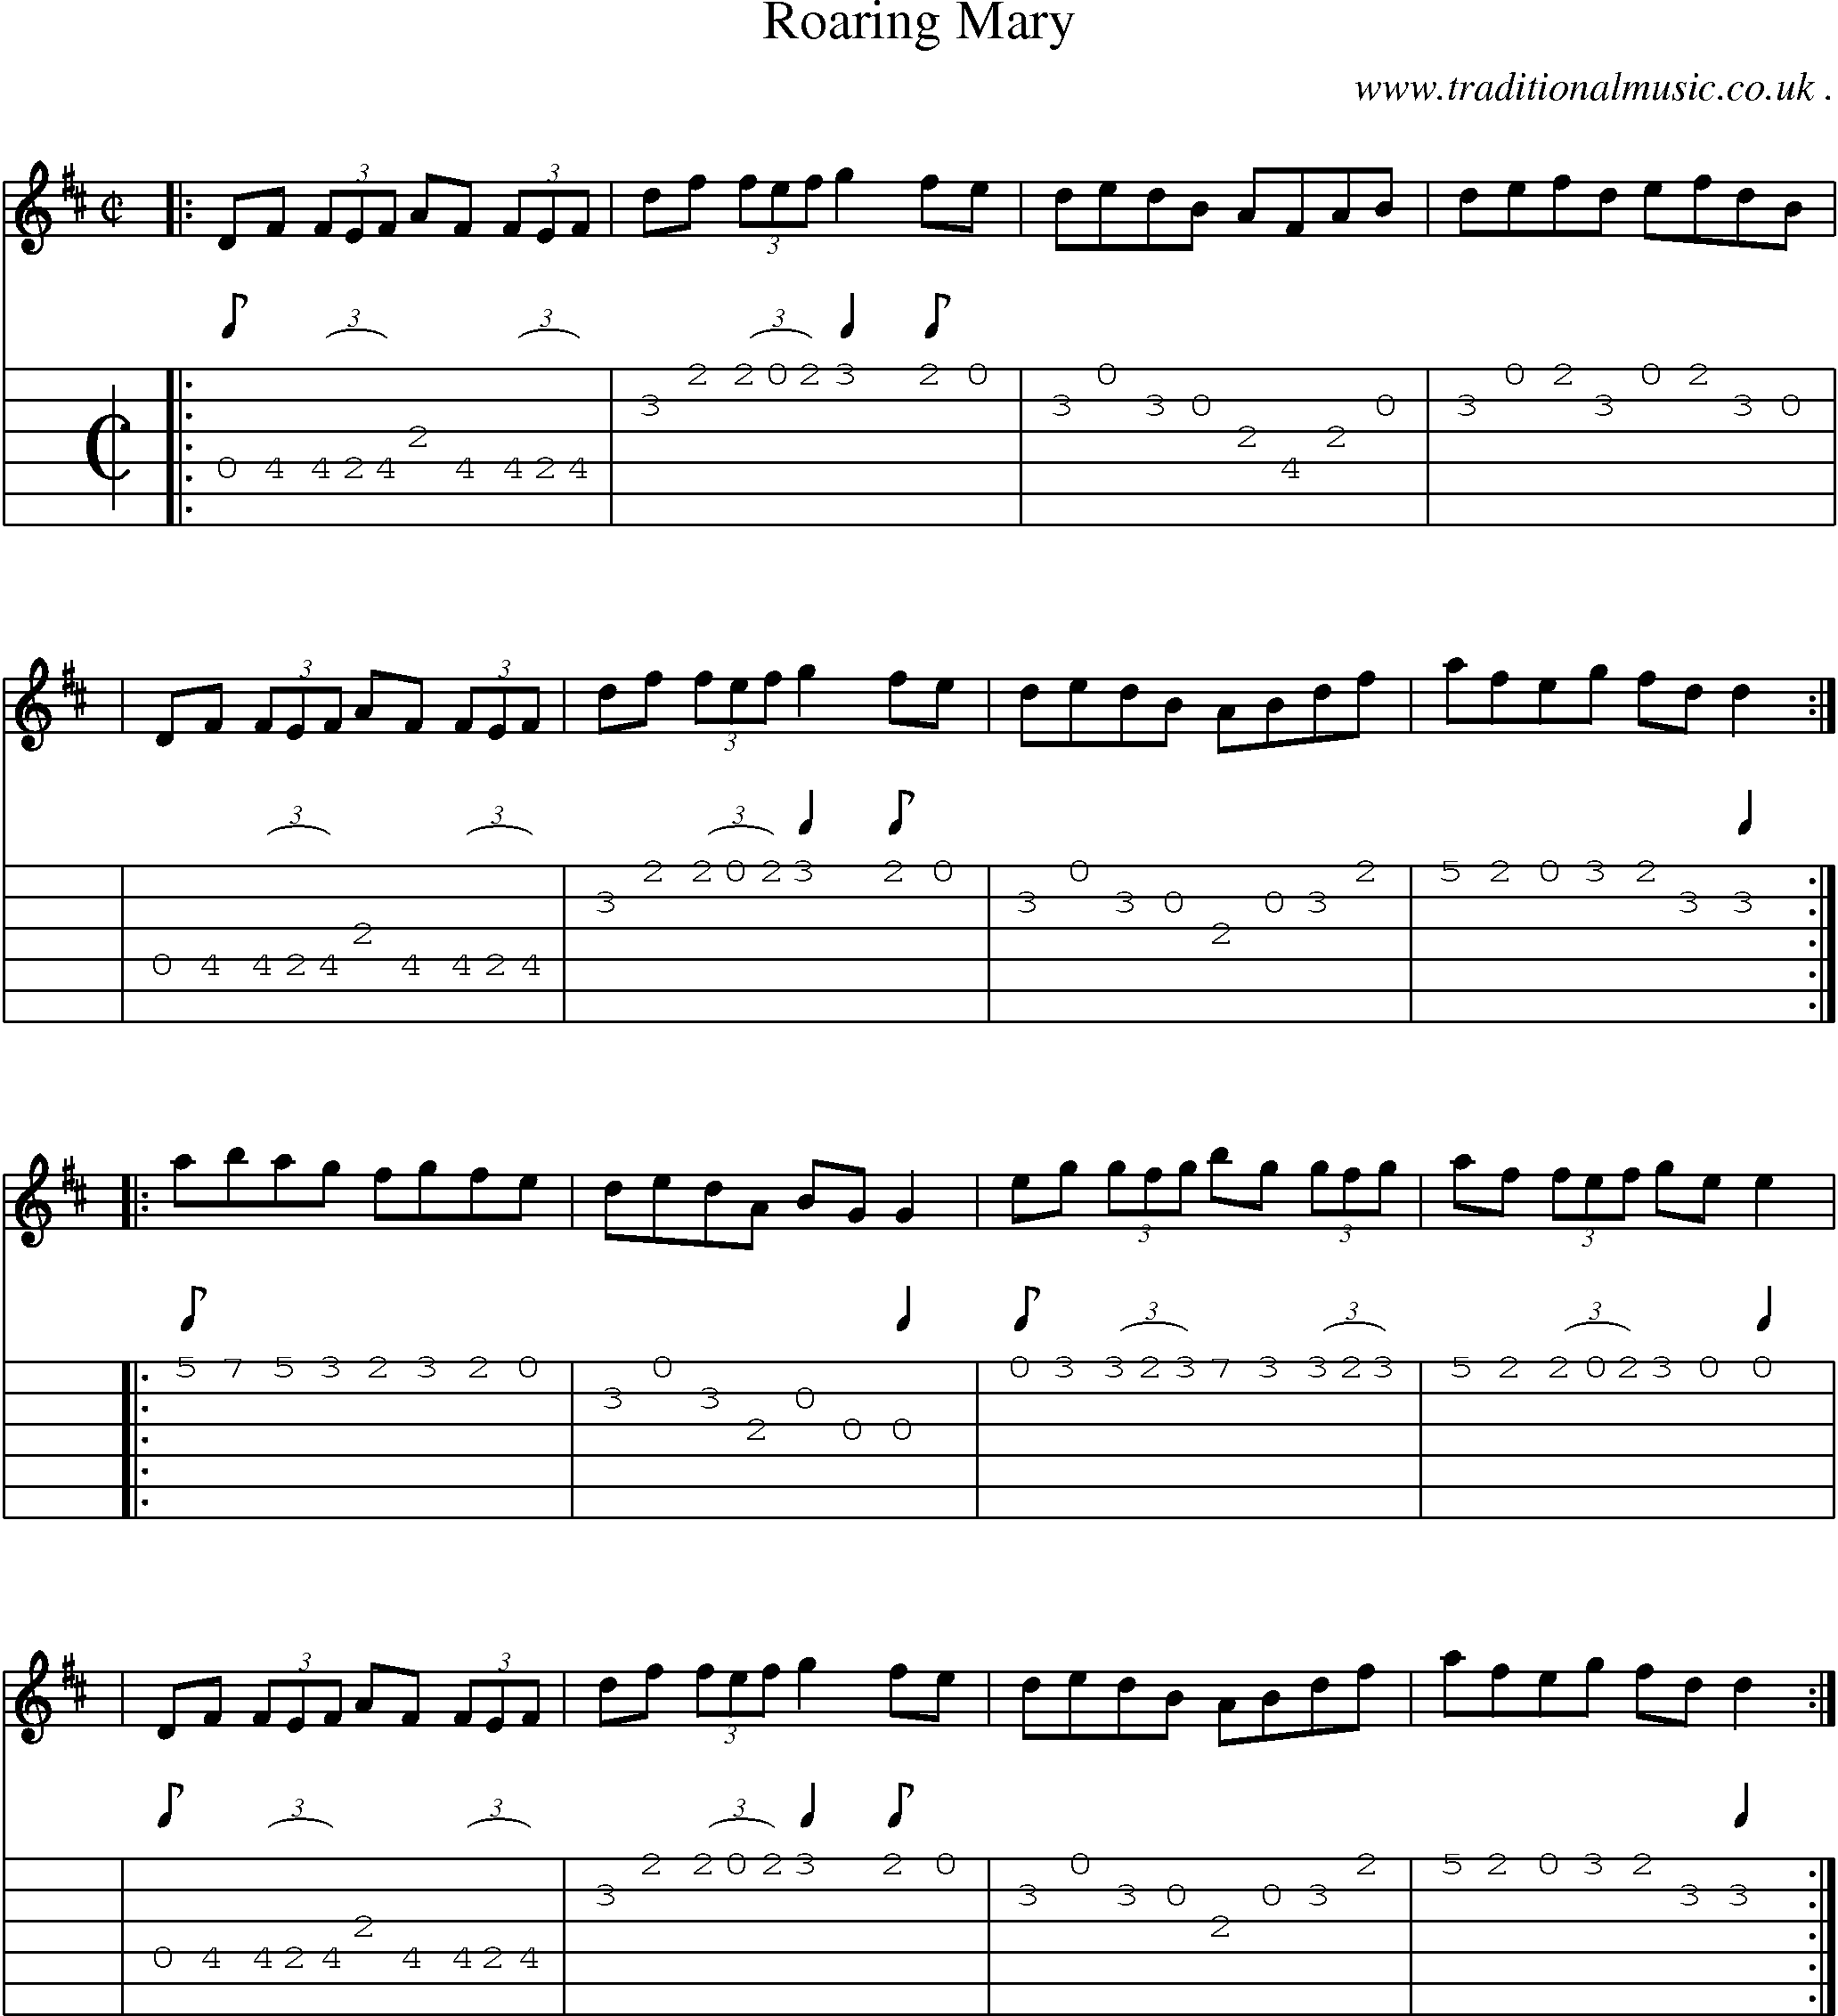 Sheet-music  score, Chords and Guitar Tabs for Roaring Mary